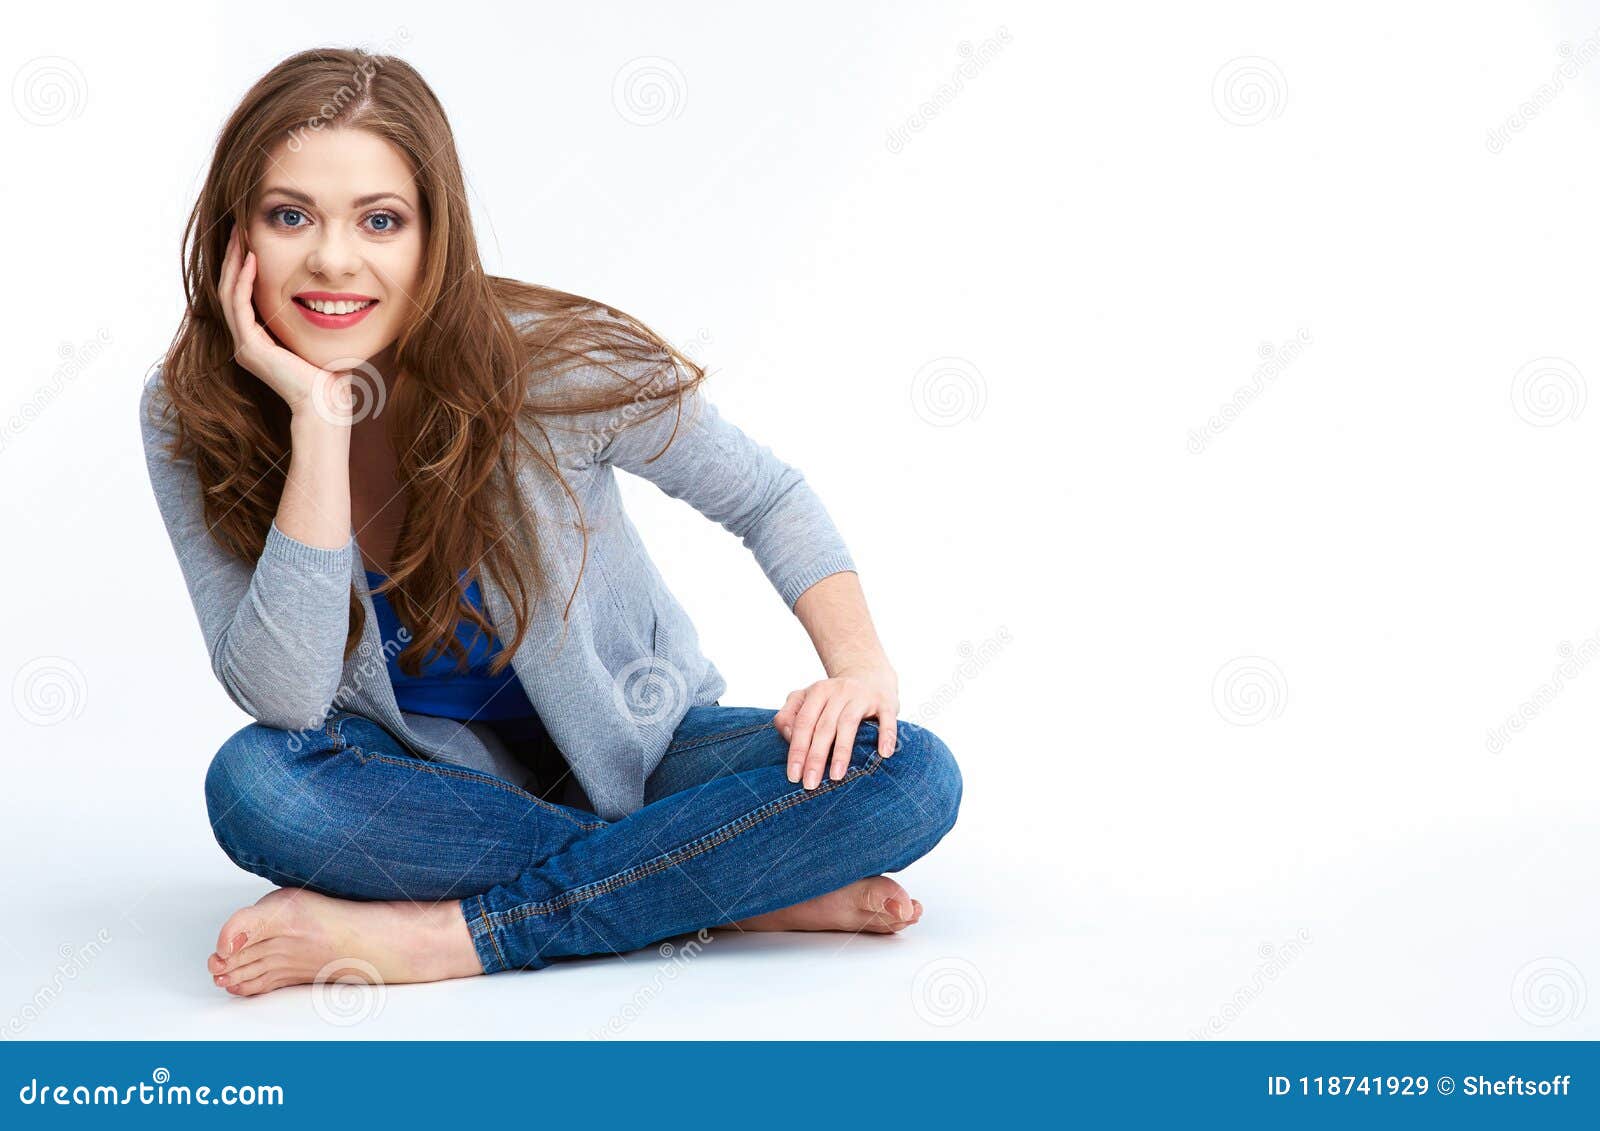 Young Beautiful Woman Posing on White Floor. Stock Image - Image of ...